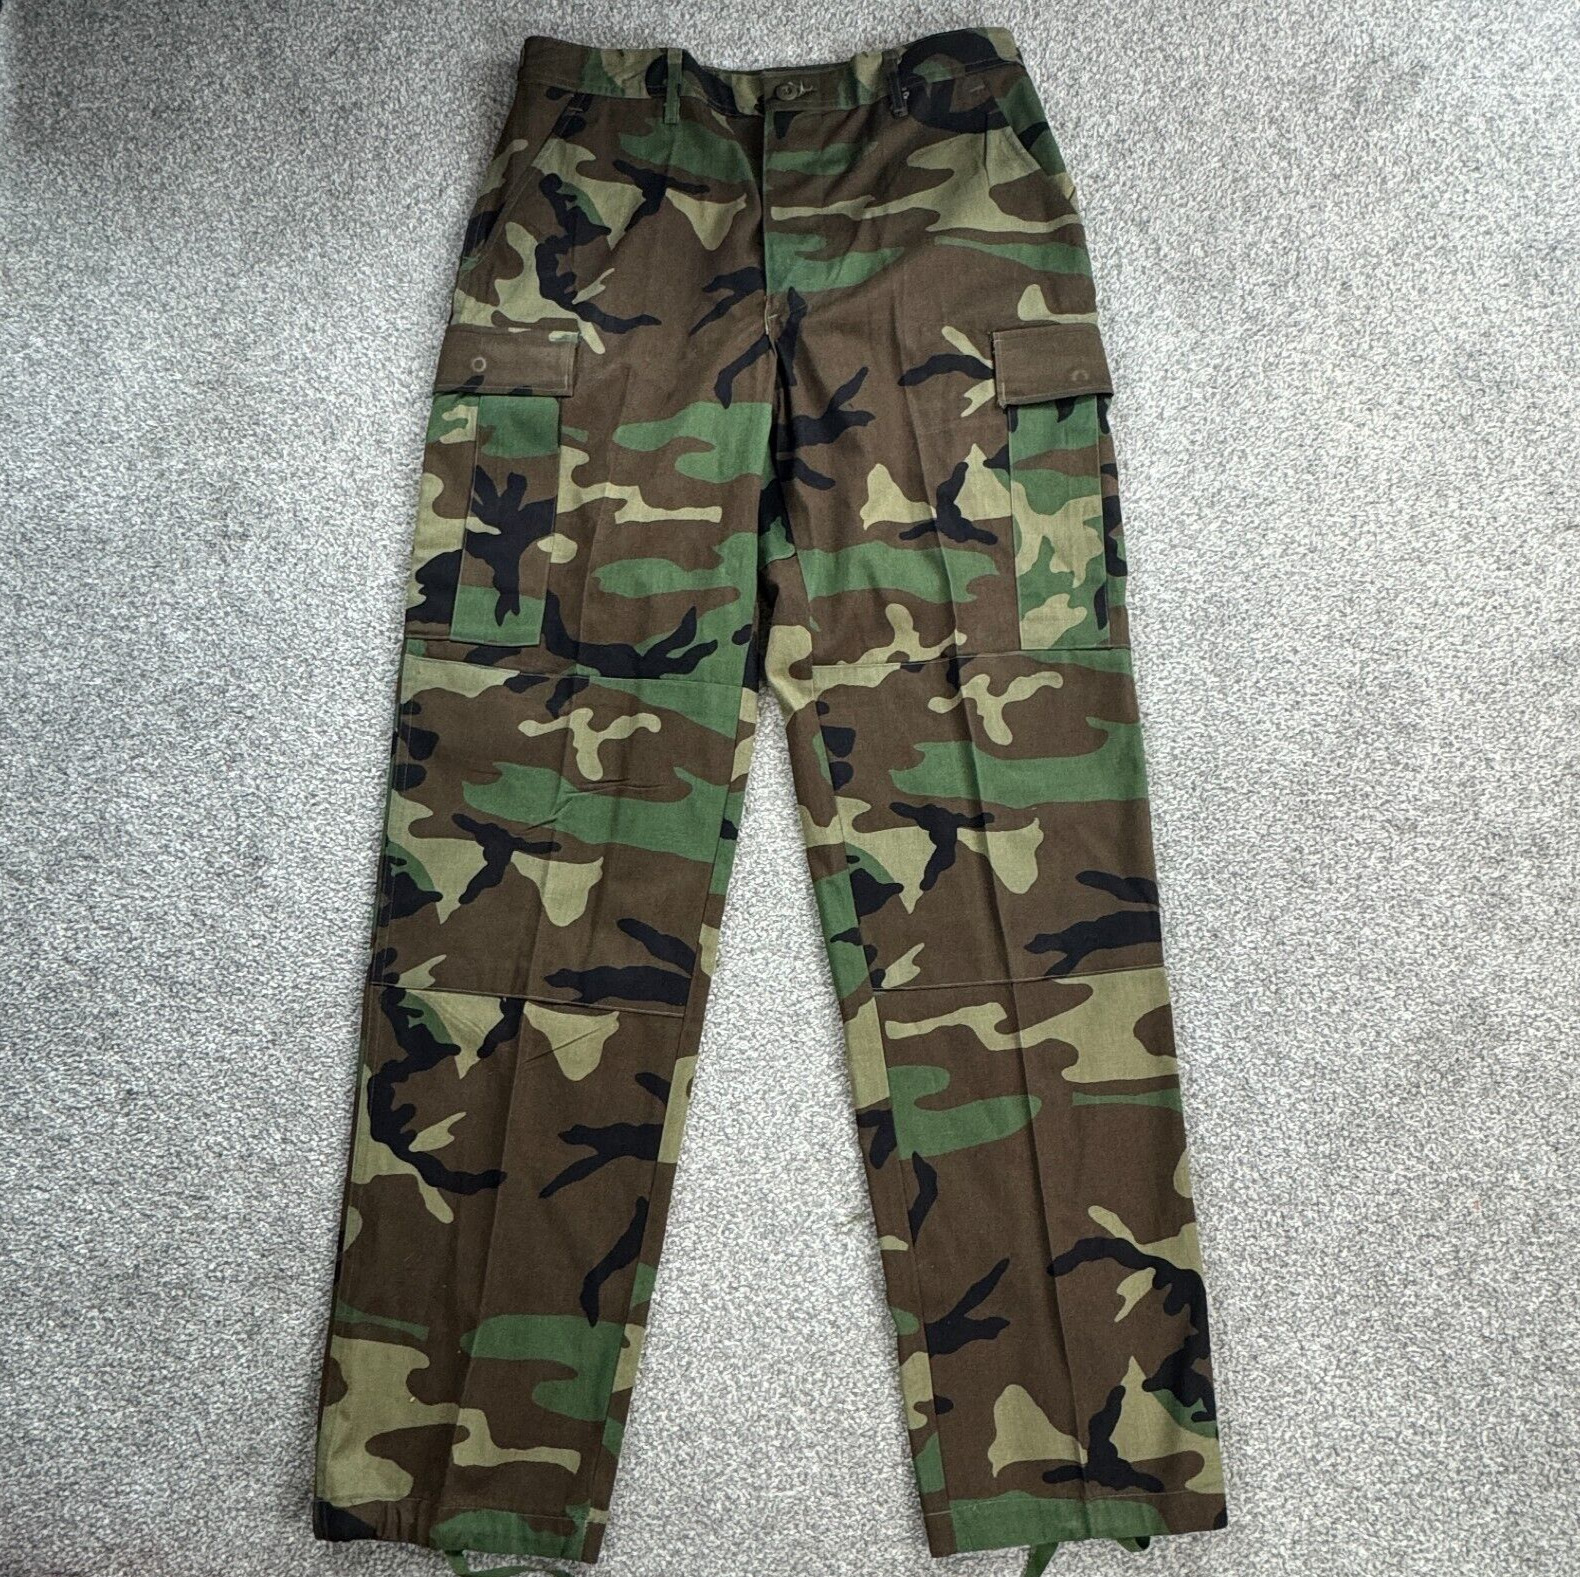 Woodland Camouflage Combat Temperate Trousers Medium Long US Military Tullahoma